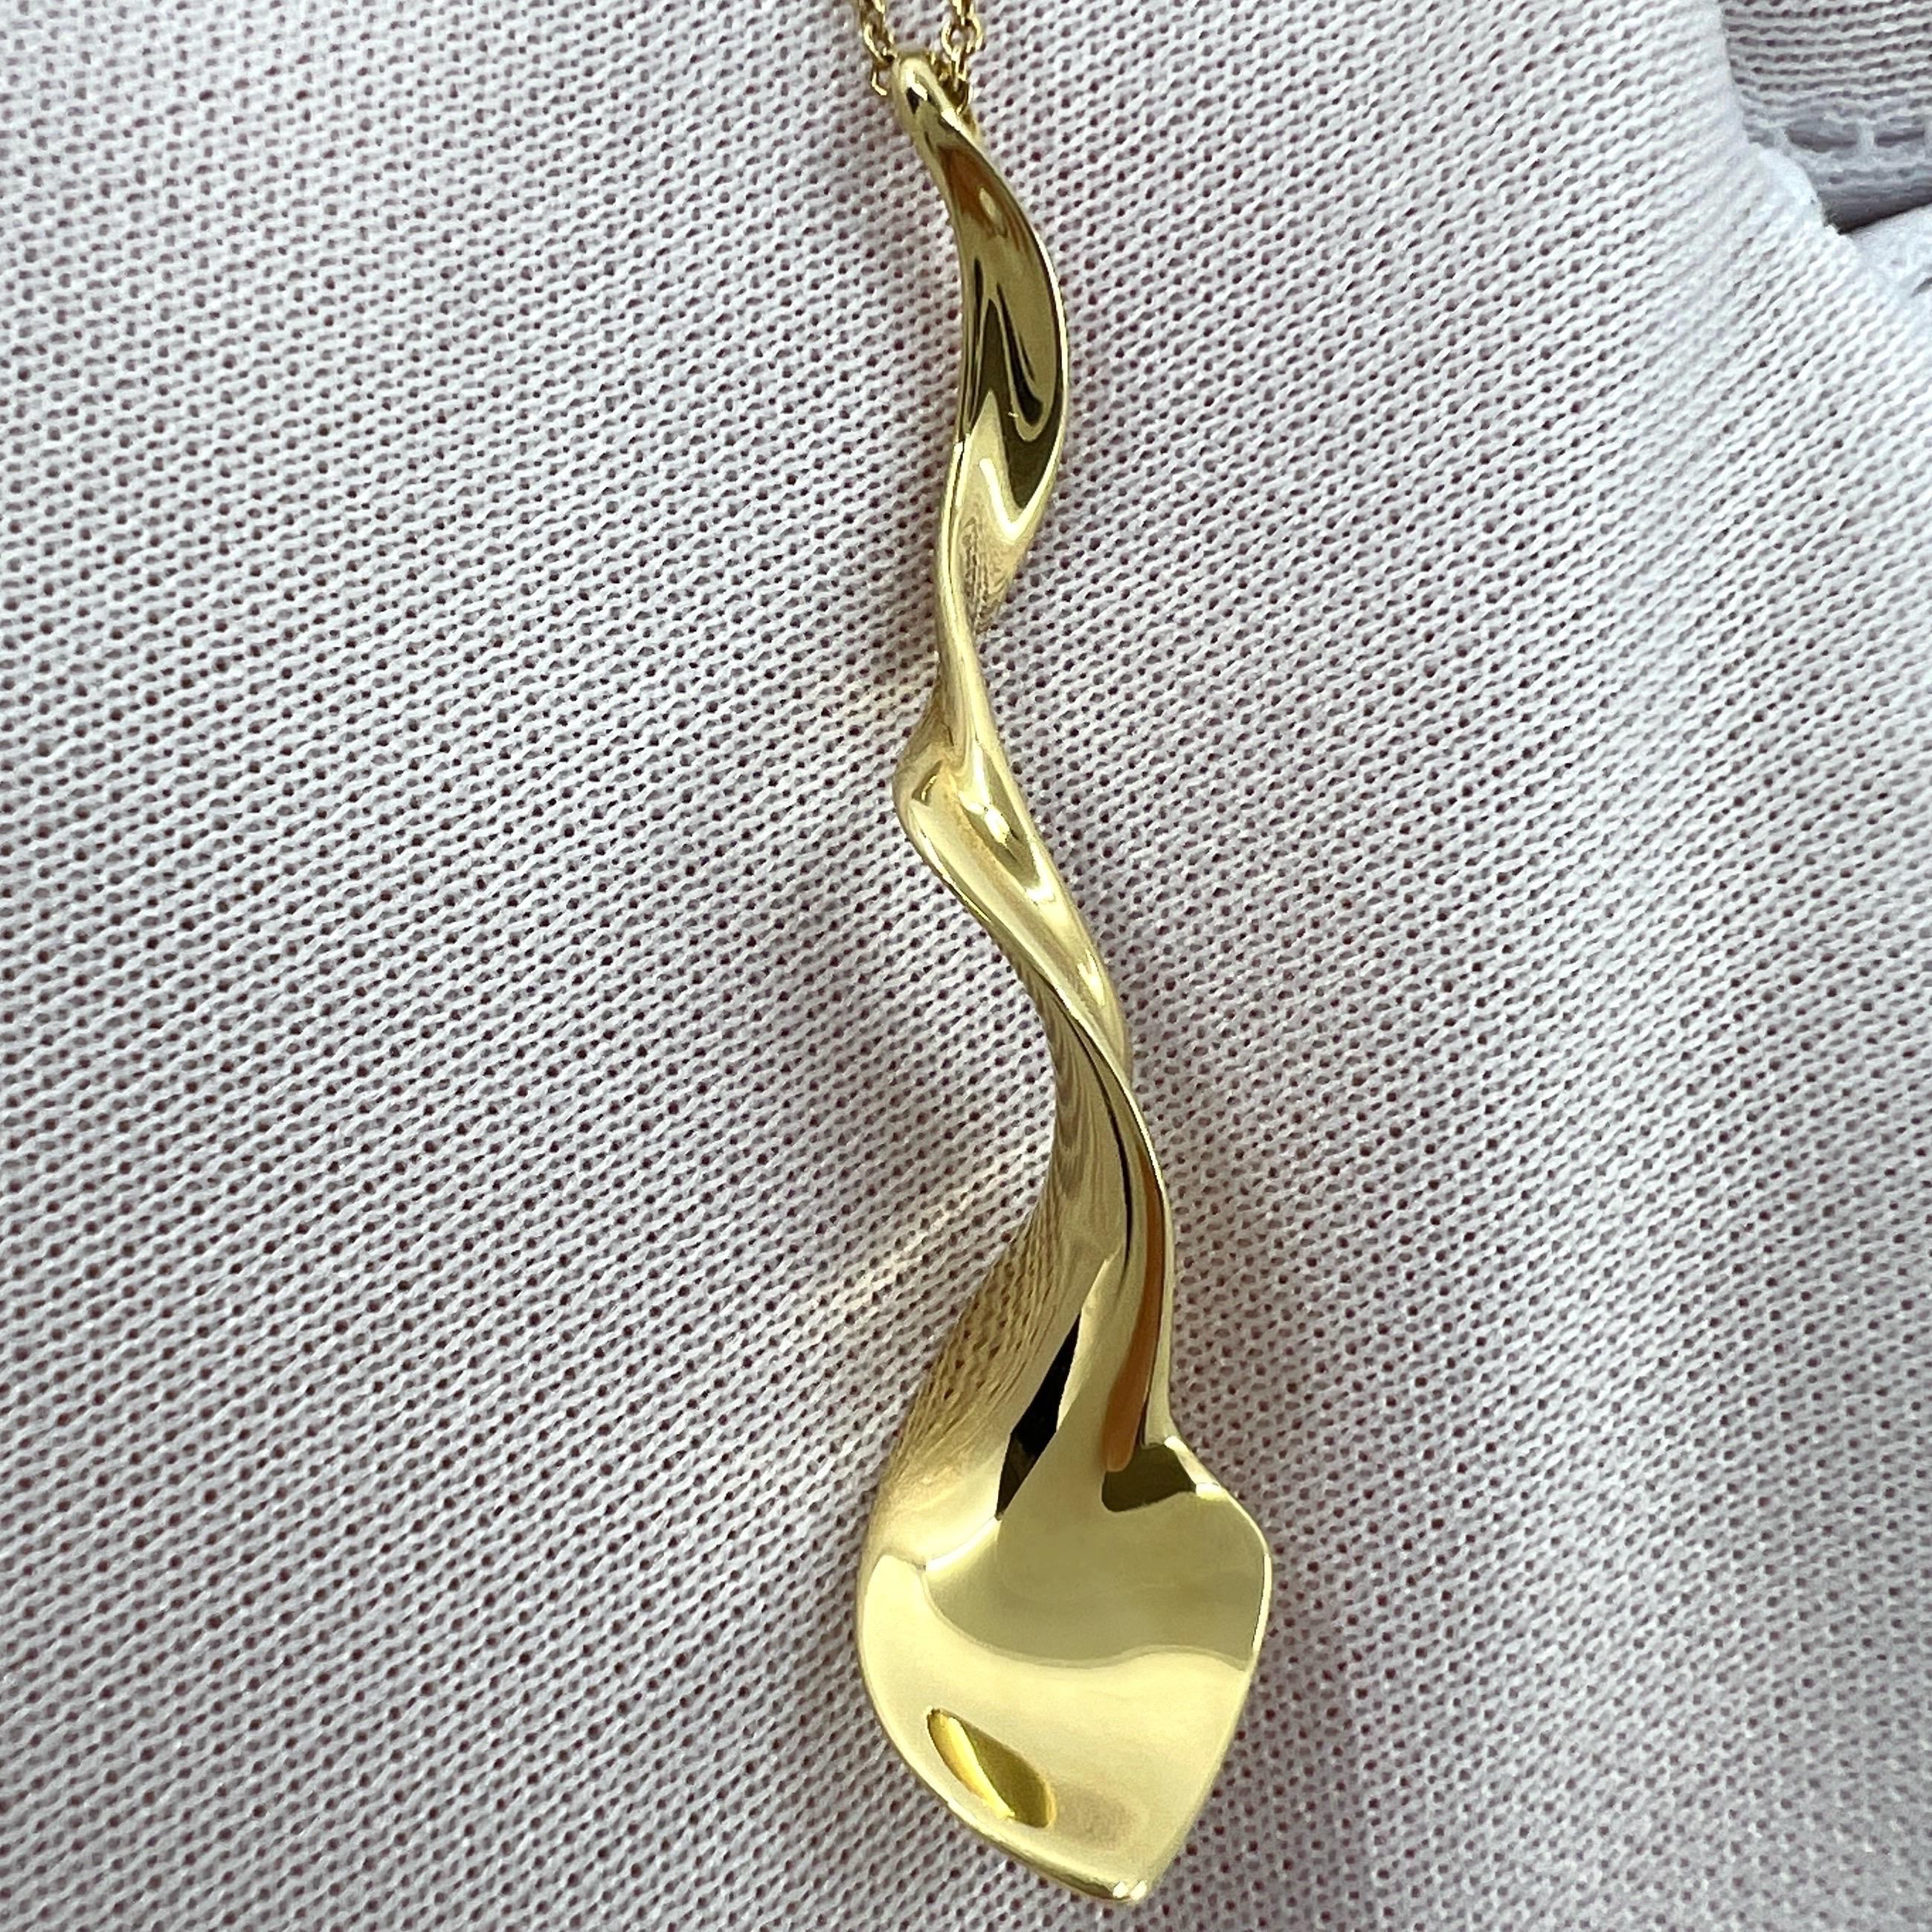 Tiffany & Co Frank Gehry 18k Yellow Gold Orchid Twist Spiral Pendant Necklace For Sale 8